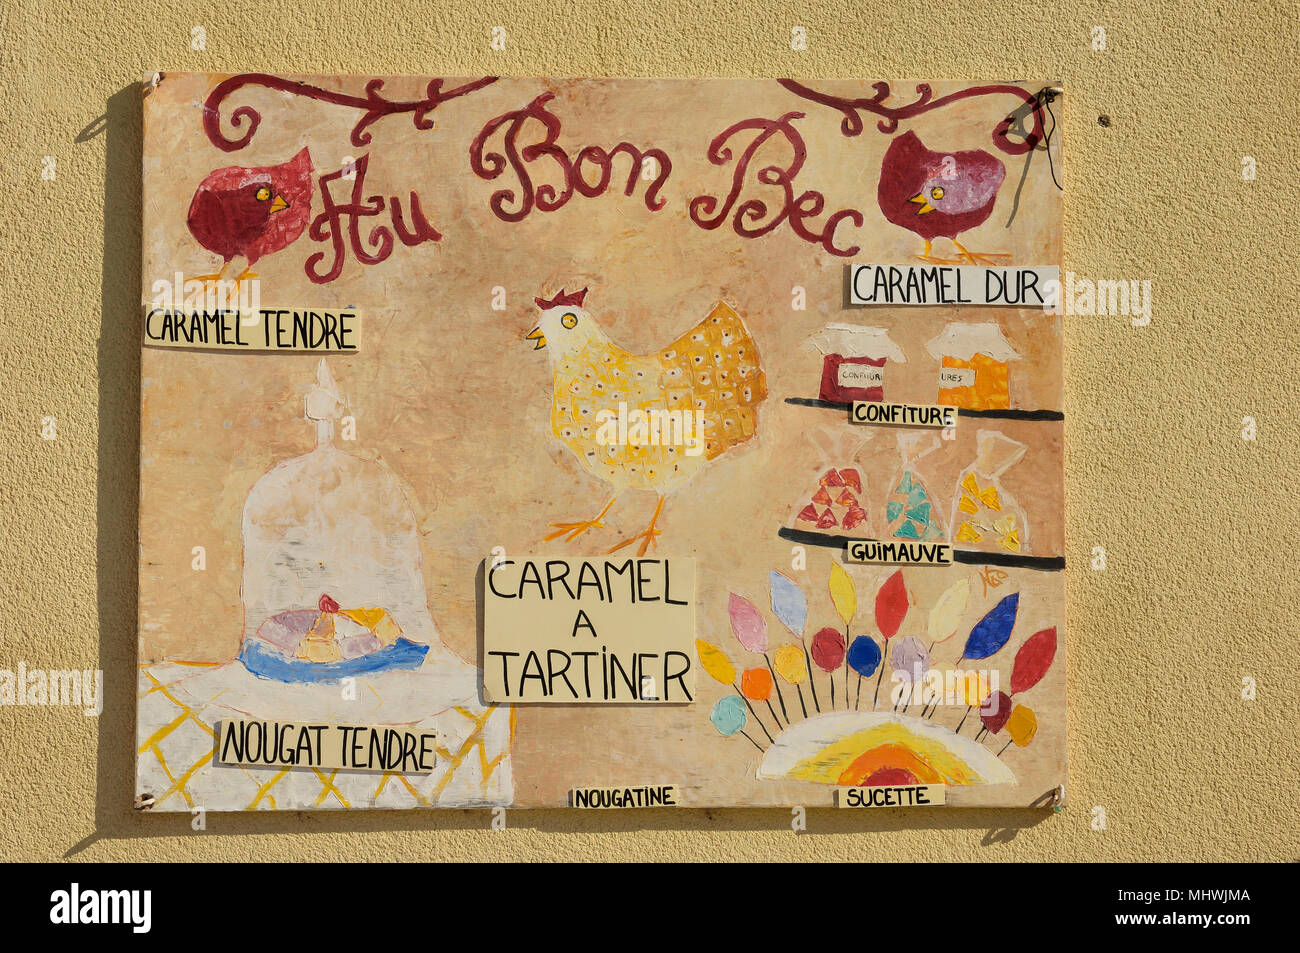 Decorative hand painted shop sign, Aix, Hiers-Brouage, Charente-Maritime department in southwestern France Stock Photo